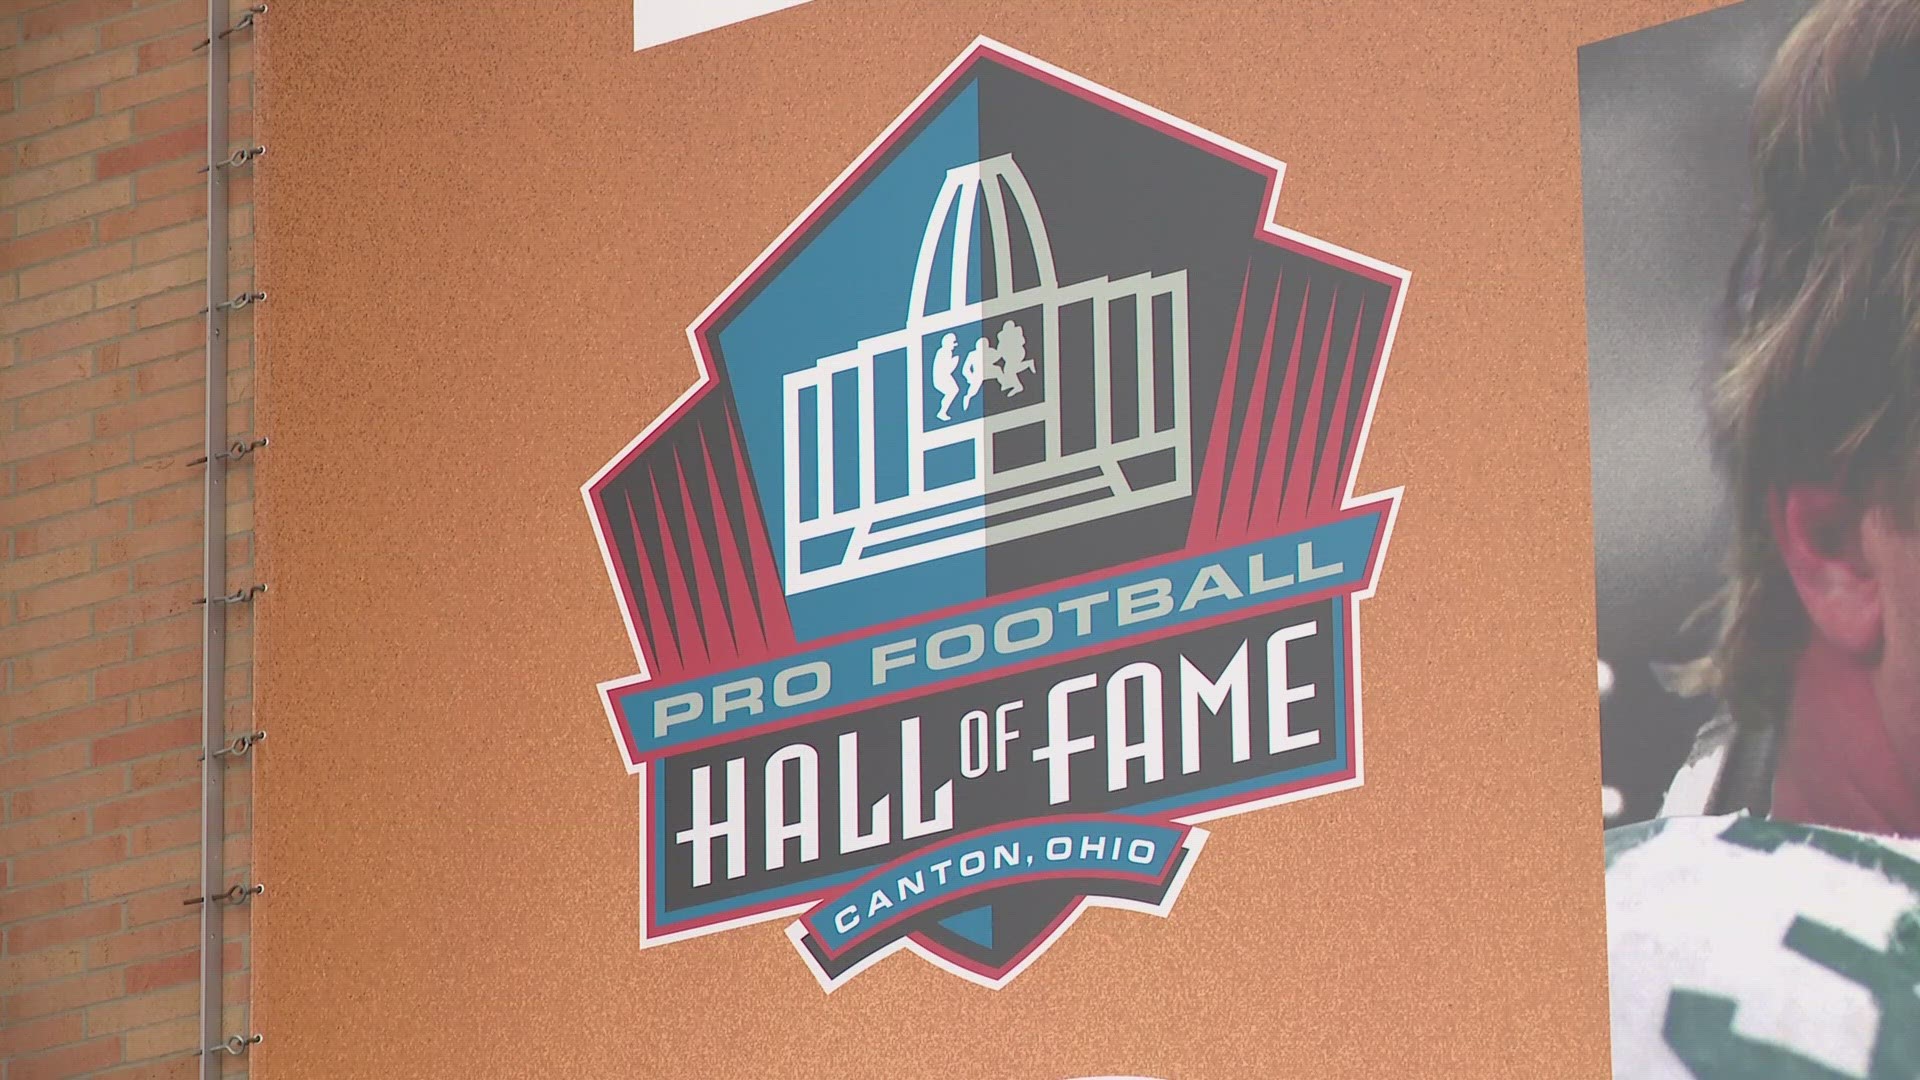 The Pro Football Hall of Fame confirmed to 3News that all of the items were recovered and returned by Strongsville administrators.